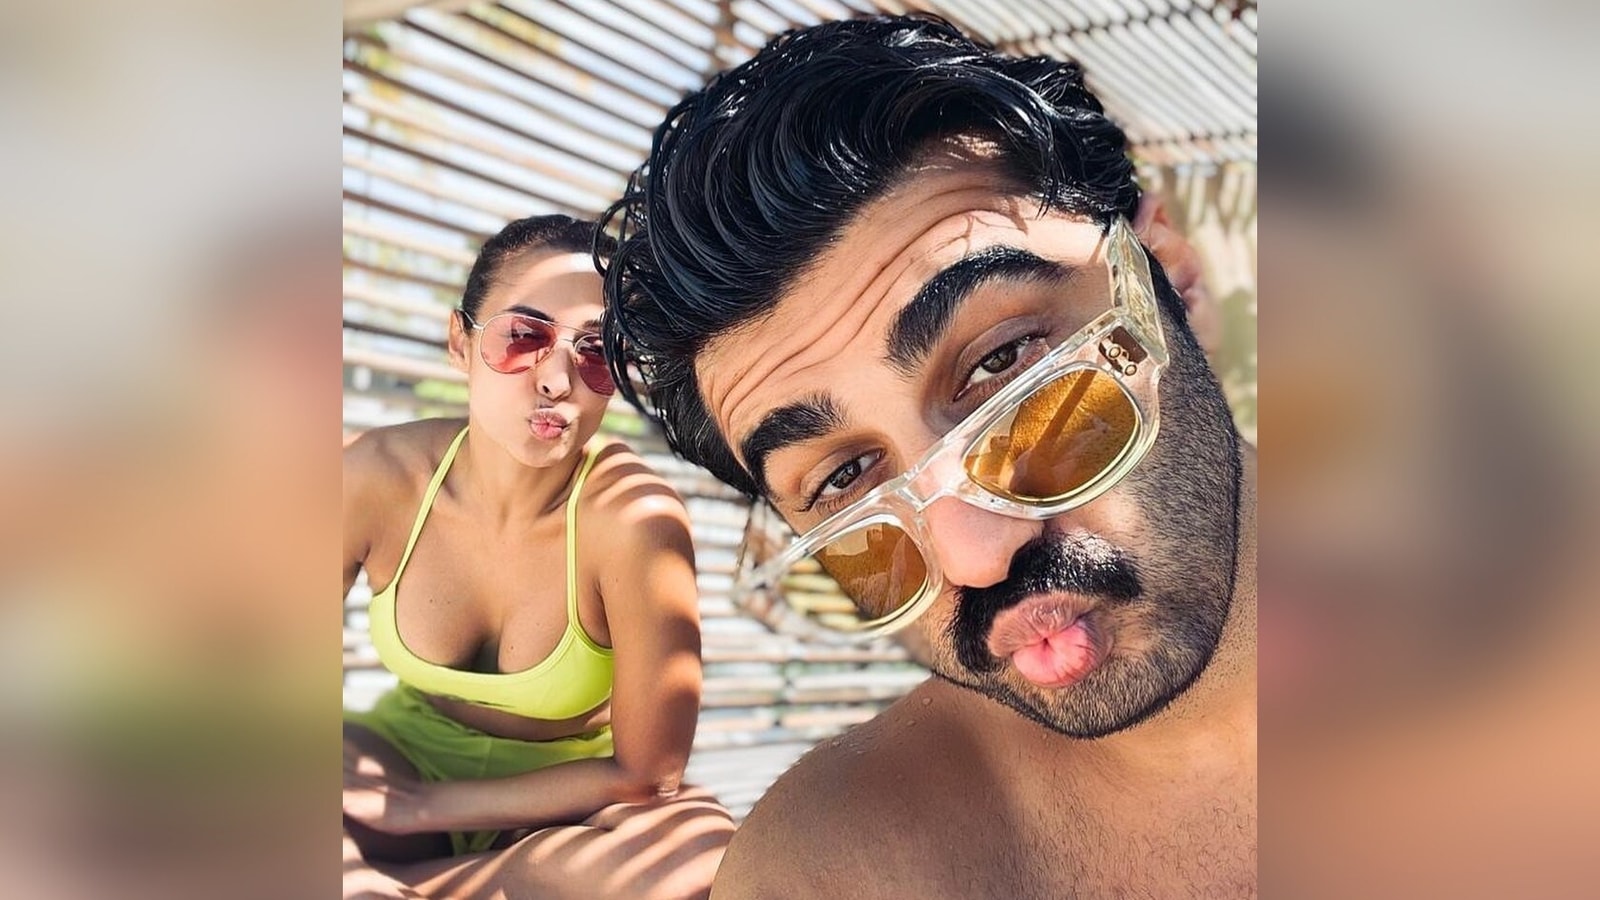 Malaika teases 'Mr Pouty' Arjun, he shares unseen video from their Maldives  trip | Bollywood - Hindustan Times